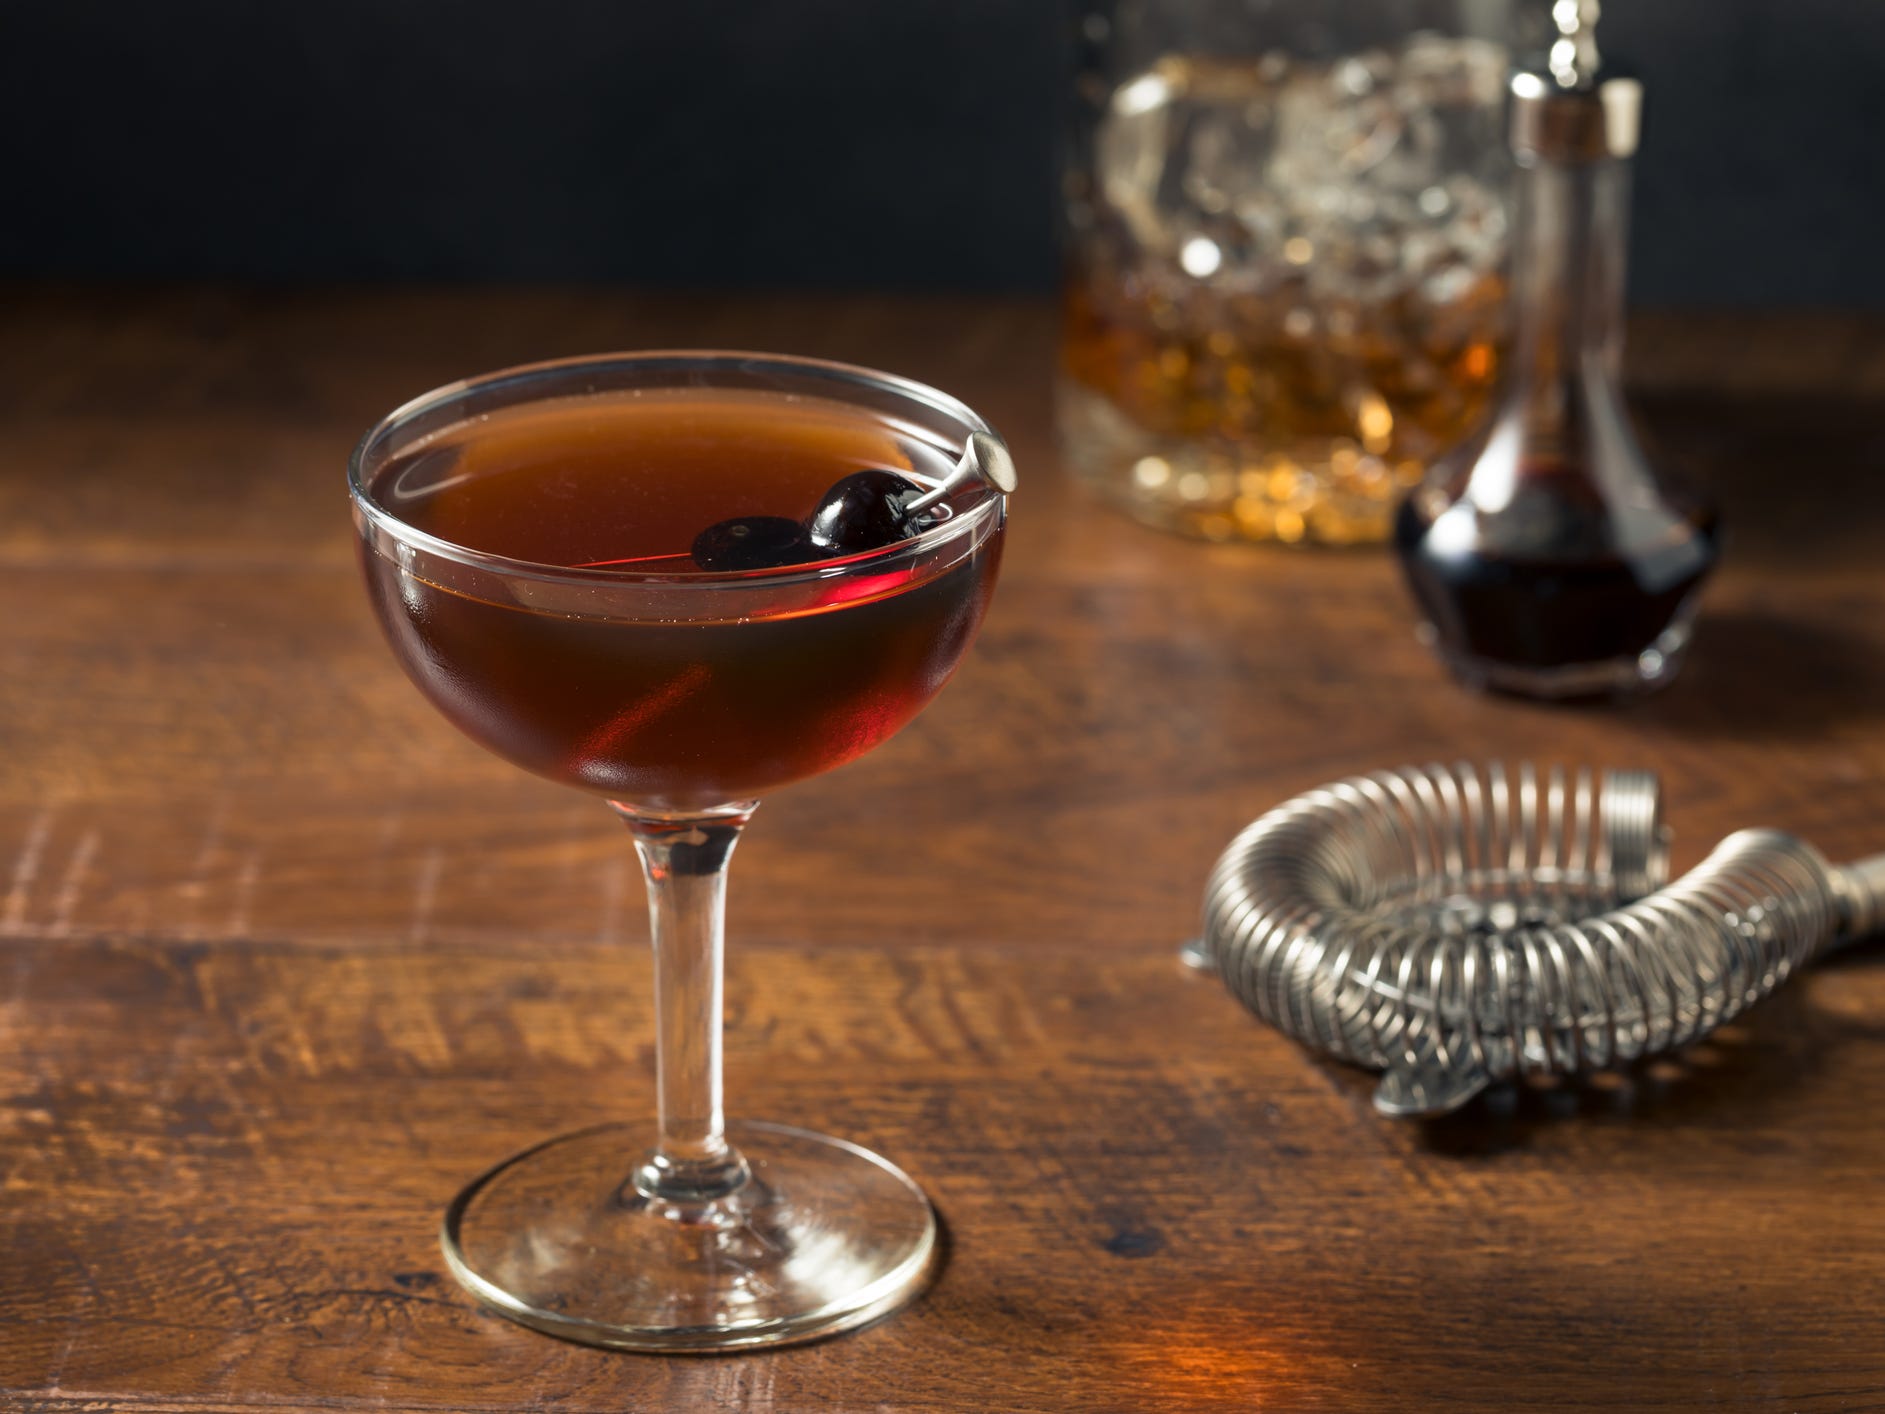 A Manhattan cocktail in a coupe glass garnished with a cherry. A cocktail strainer and a glass decanter of whiskey sit in the background.